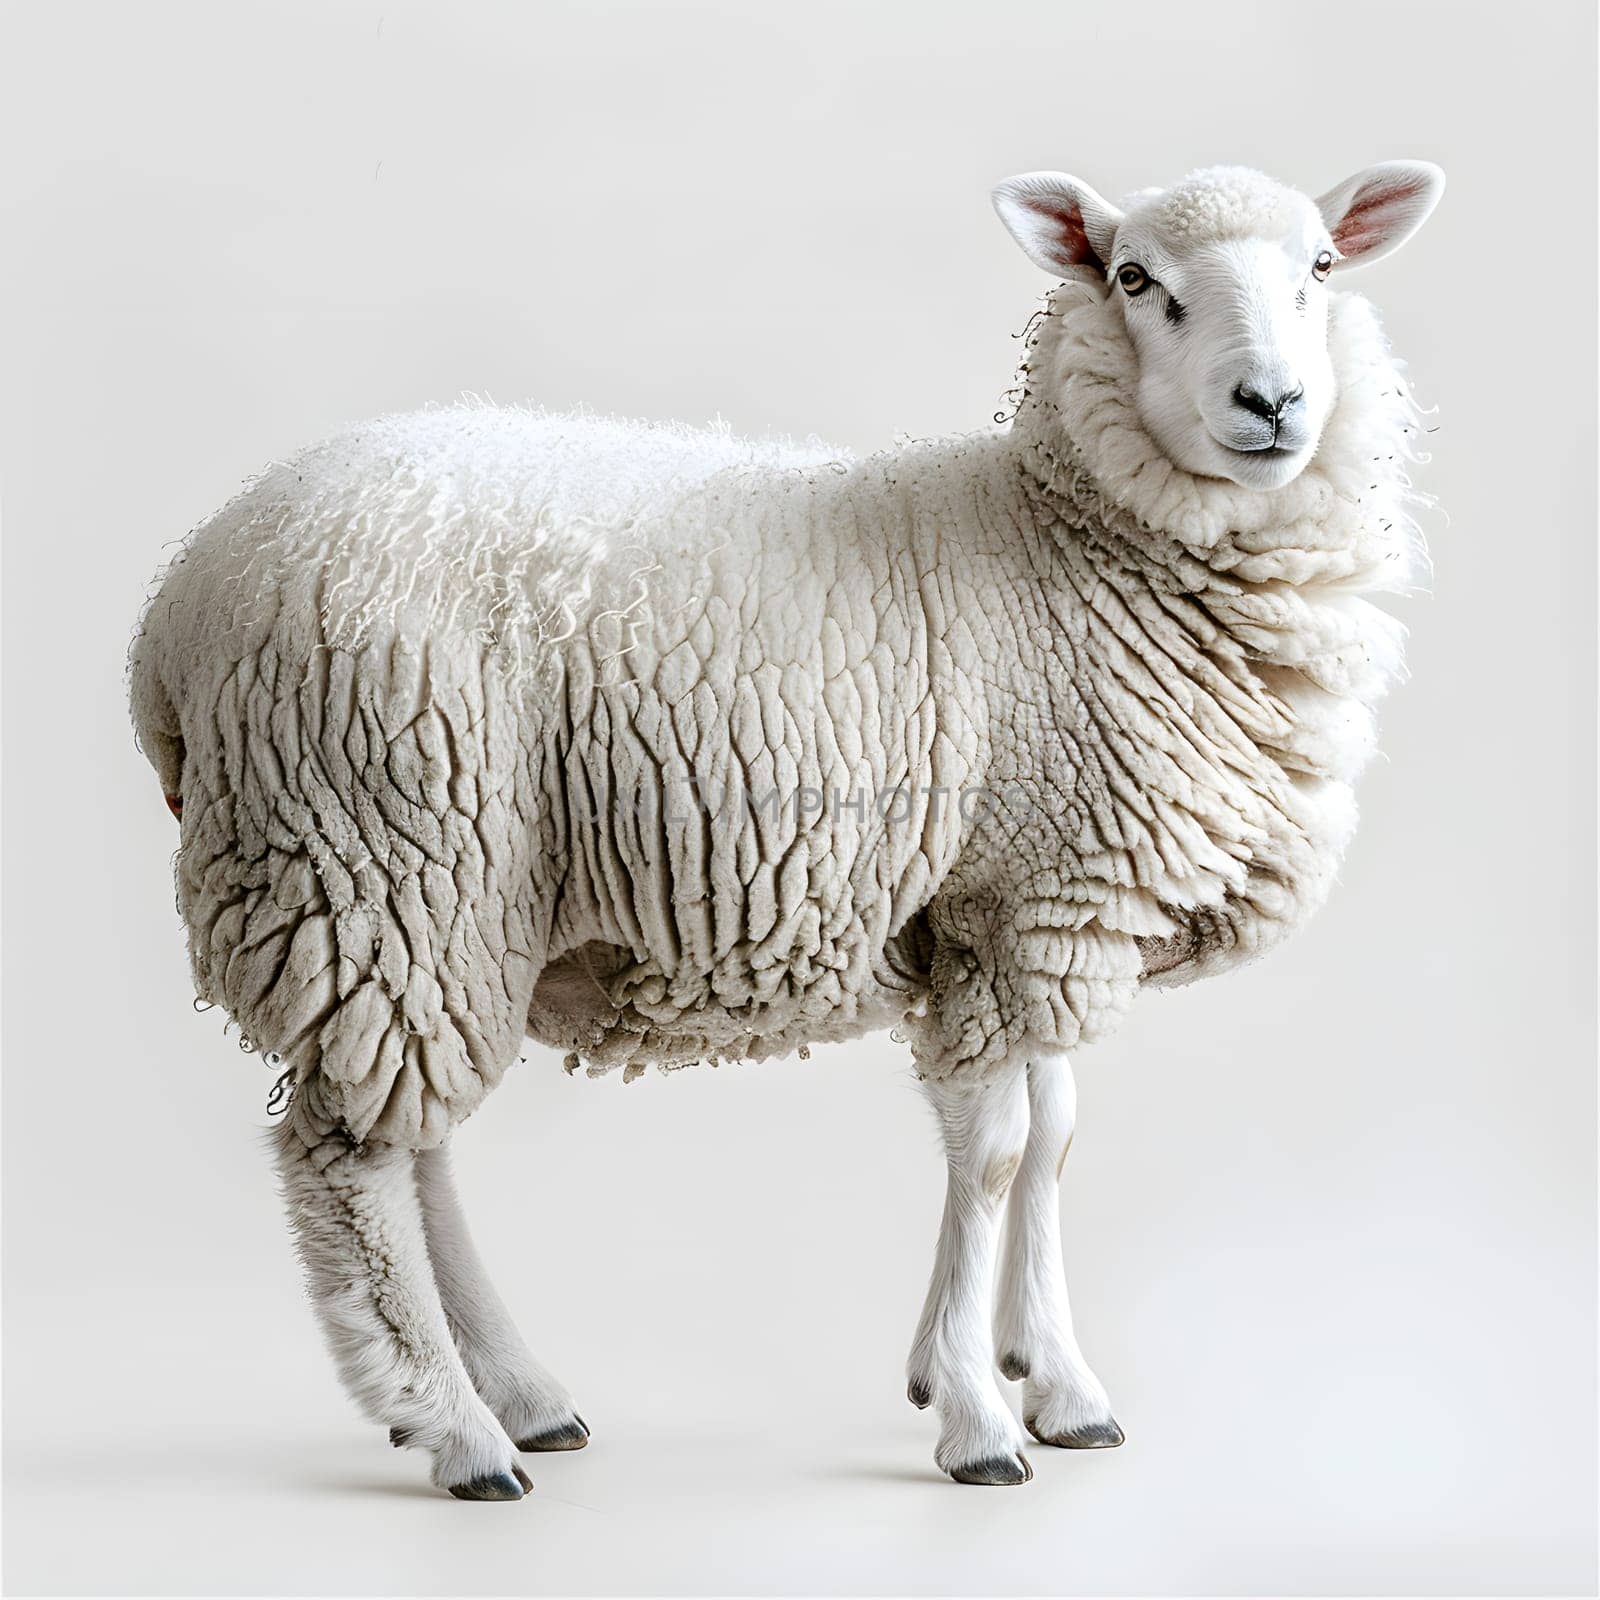 White sheep from cowgoat family stands on hind legs on white background by Nadtochiy